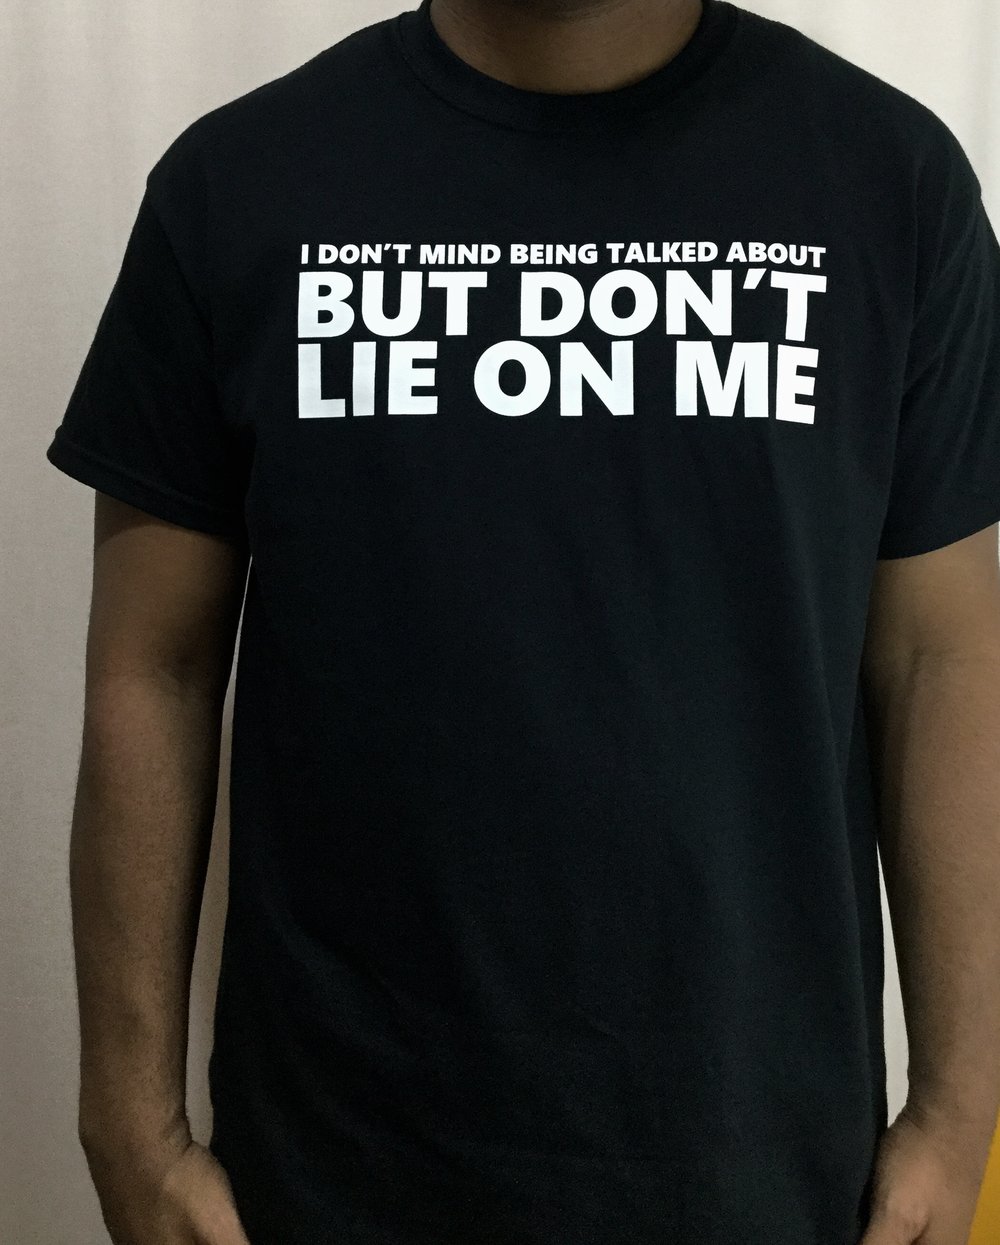 I don't mind being talked about. But don't lie on me (T-shirt) Unisex